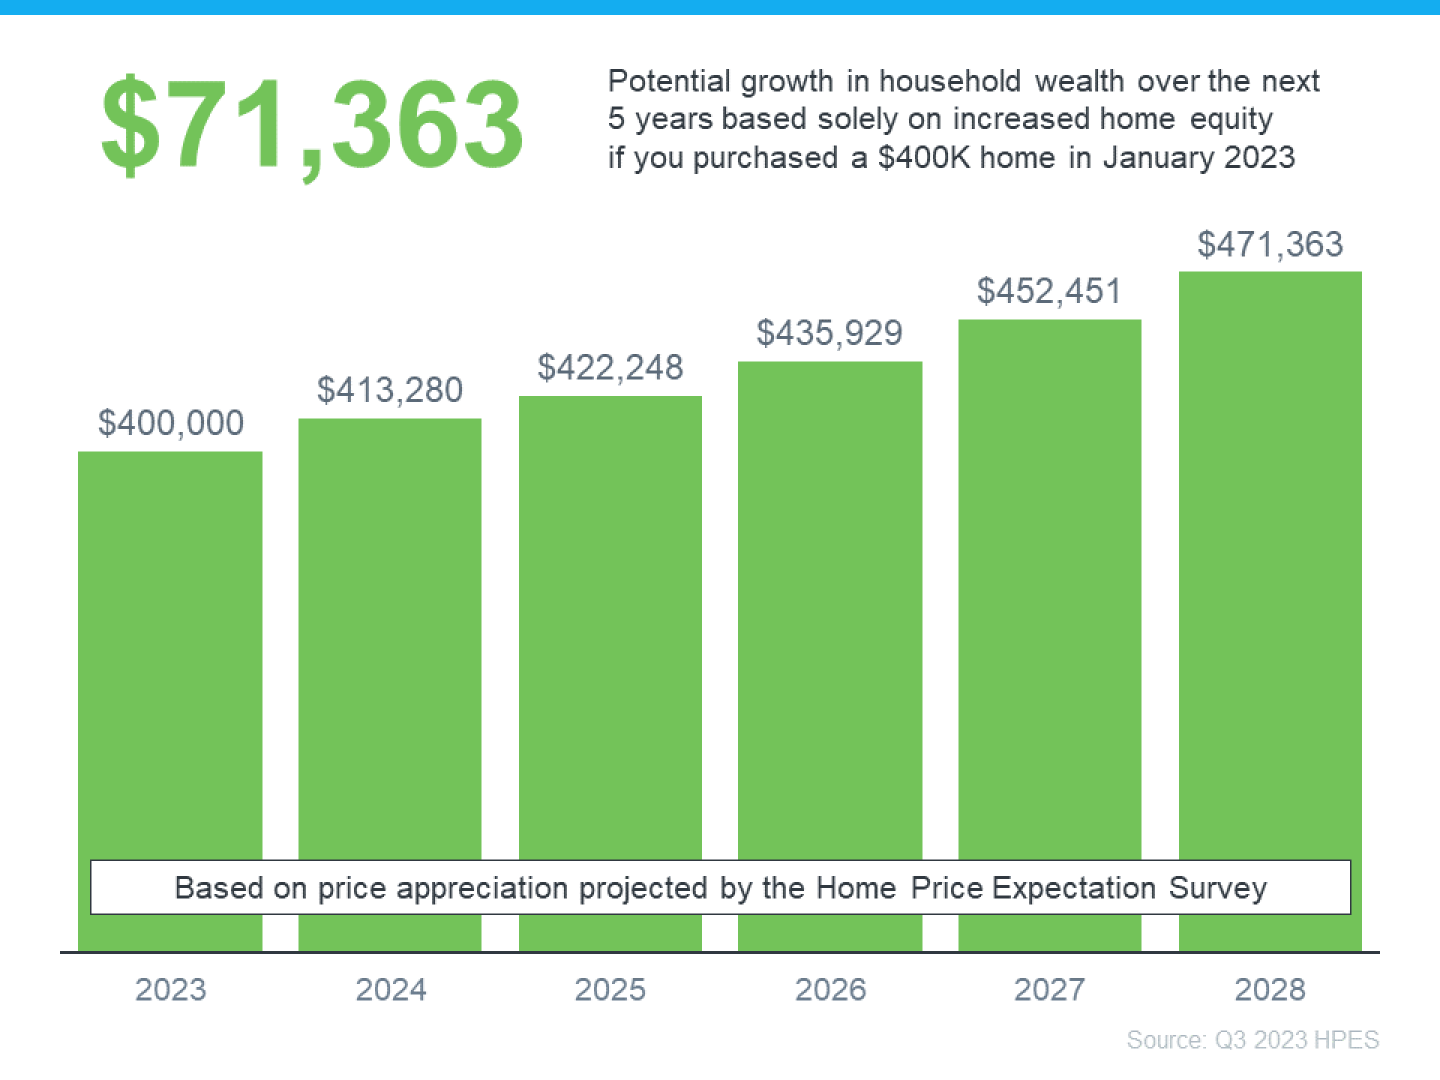 20231205-71363-Home-Price-Expectation-Survey.png